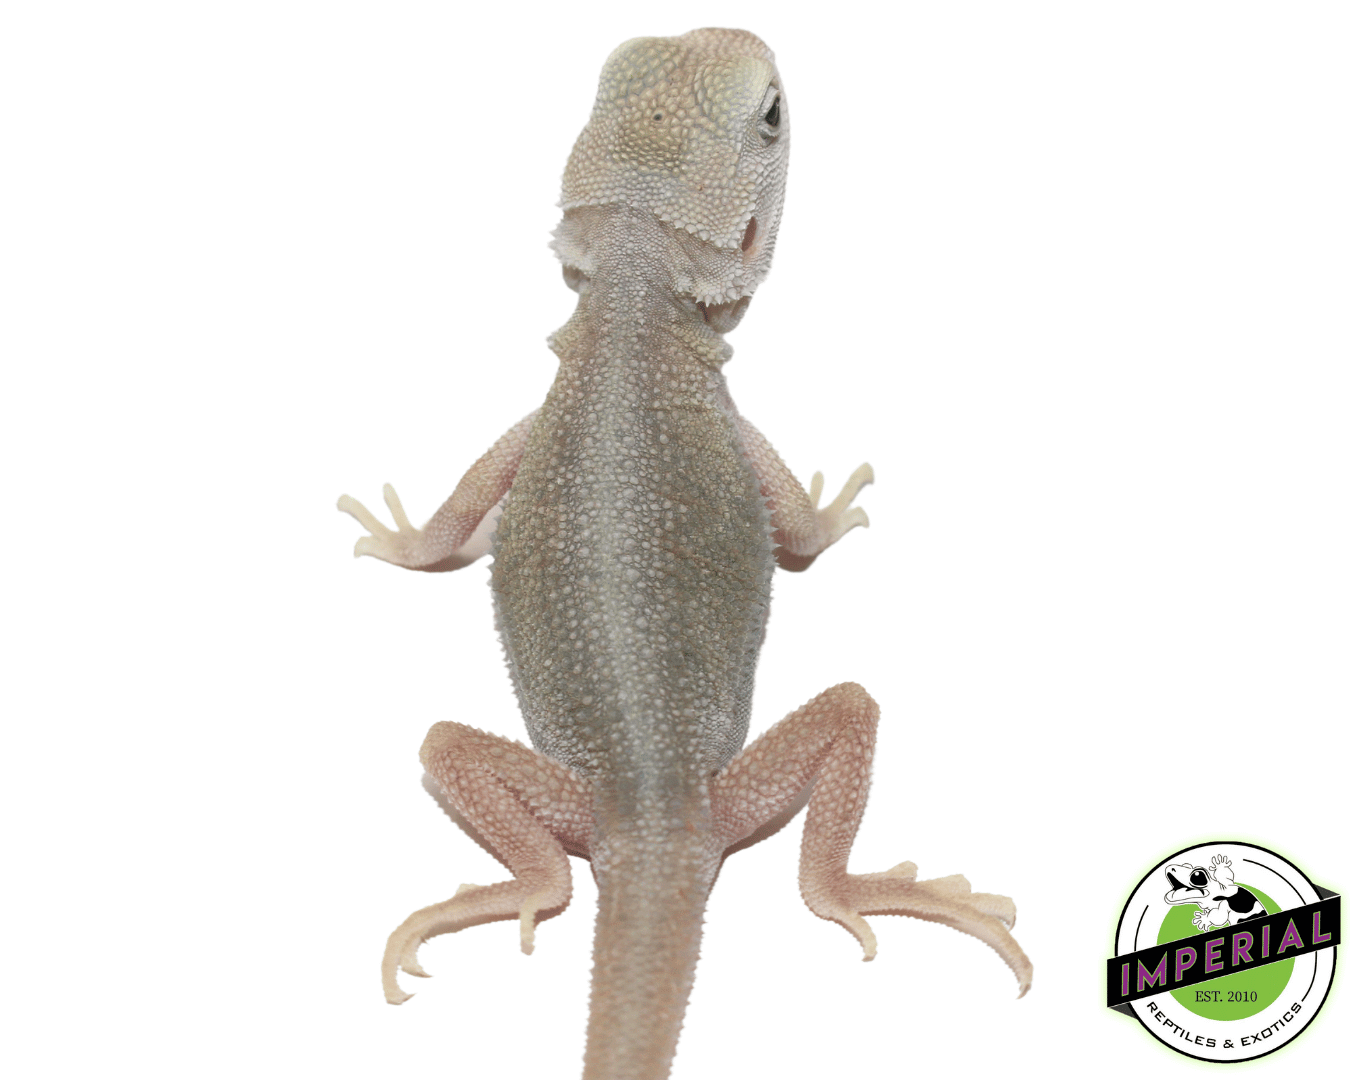 hypo translucent dunner witblits bearded dragon for sale, buy reptiles online